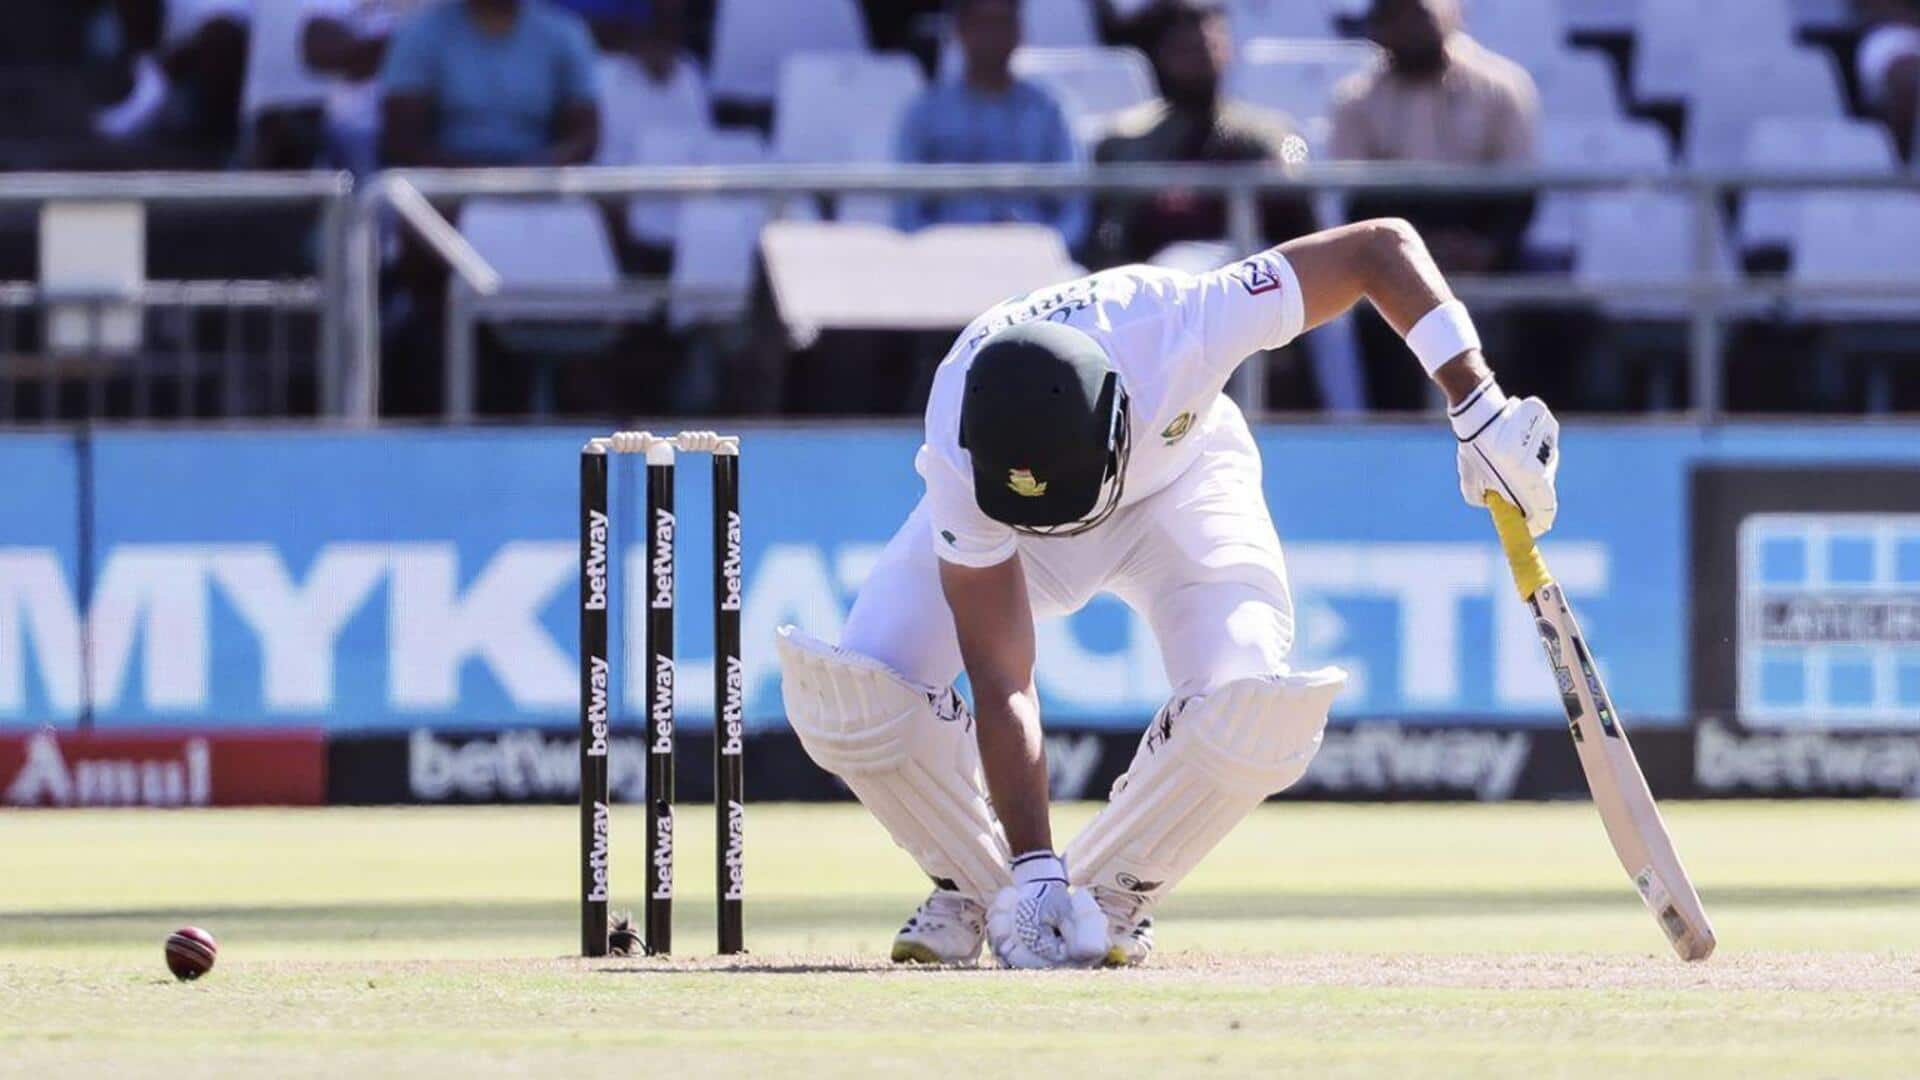 SA vs IND, 2nd Test: ICC rates Newlands pitch 'unsatisfactory'